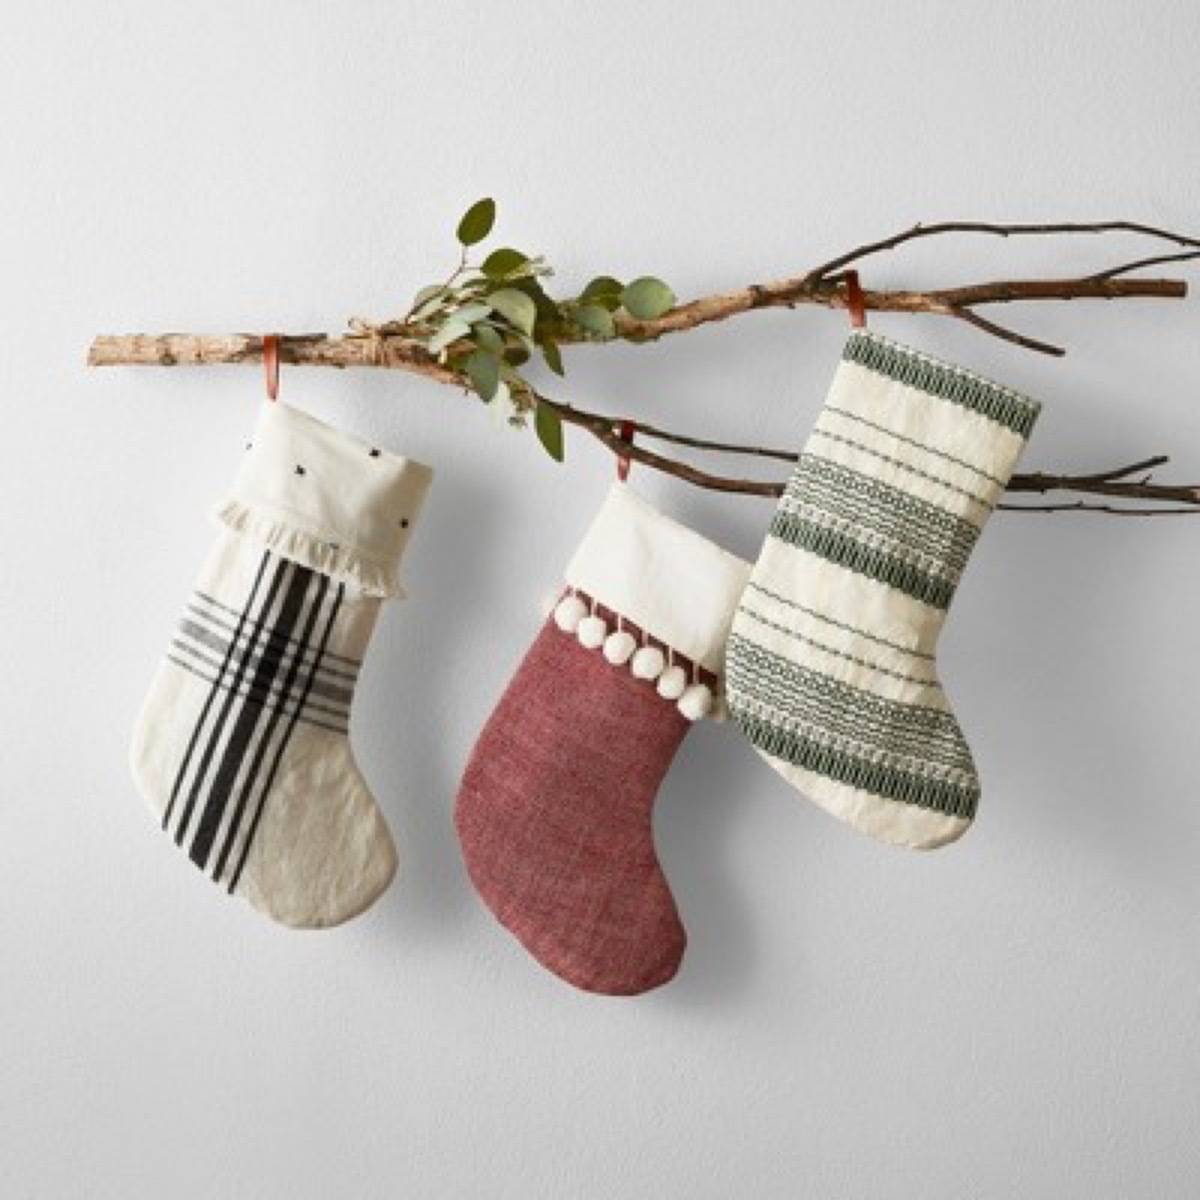 Three stockings hang from a small twig.